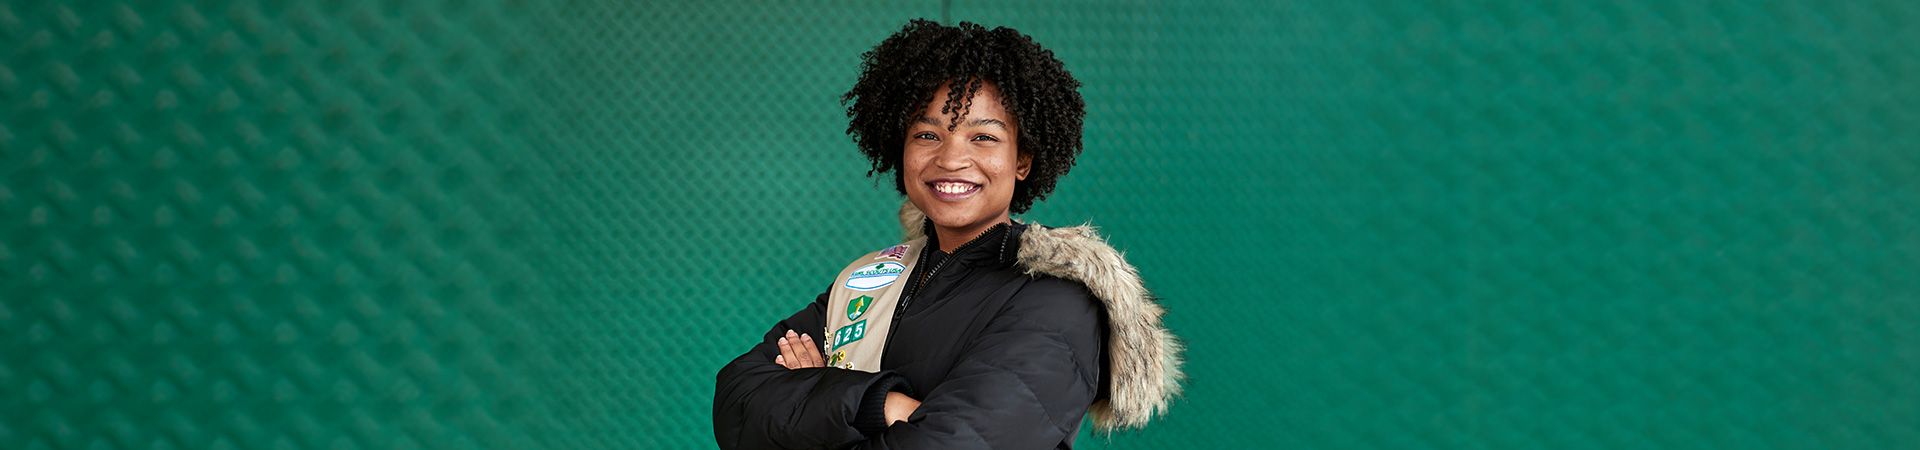  High school girl in Girl Scout sash and winter jacket smiling at camera against green backdrop. 